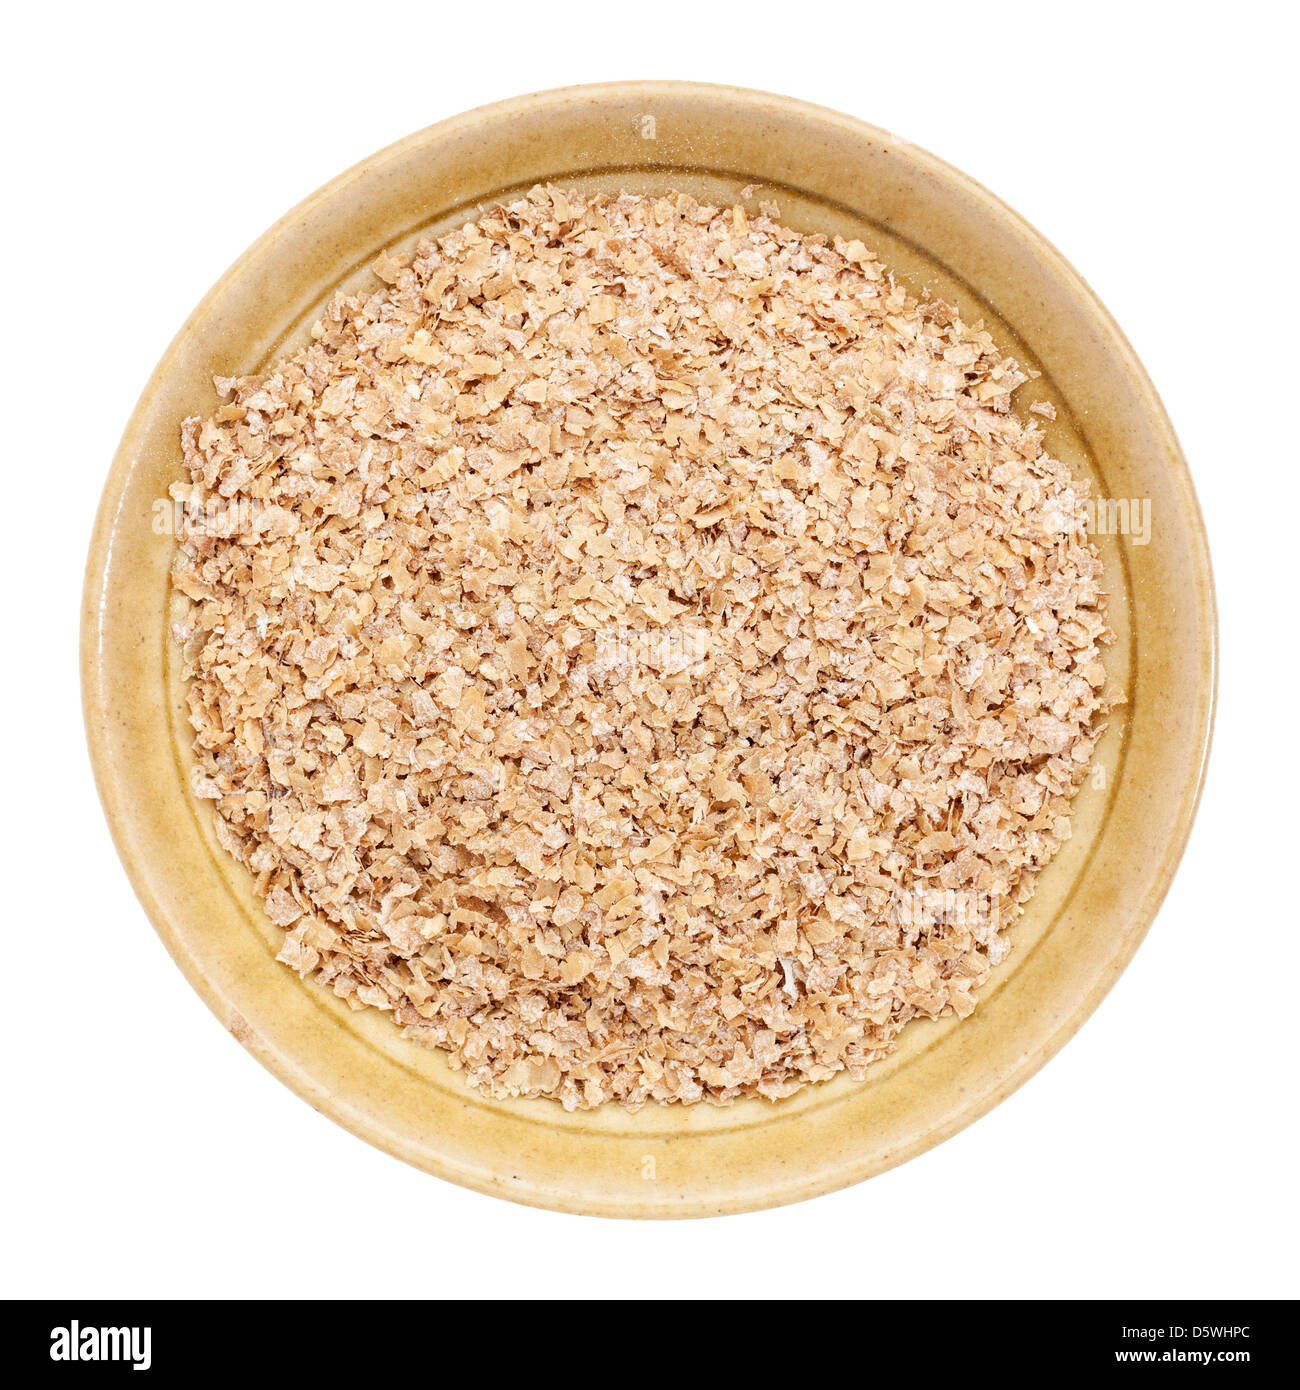 wheat bran in a small ceramic bowl isolated on white, top view Stock Photo